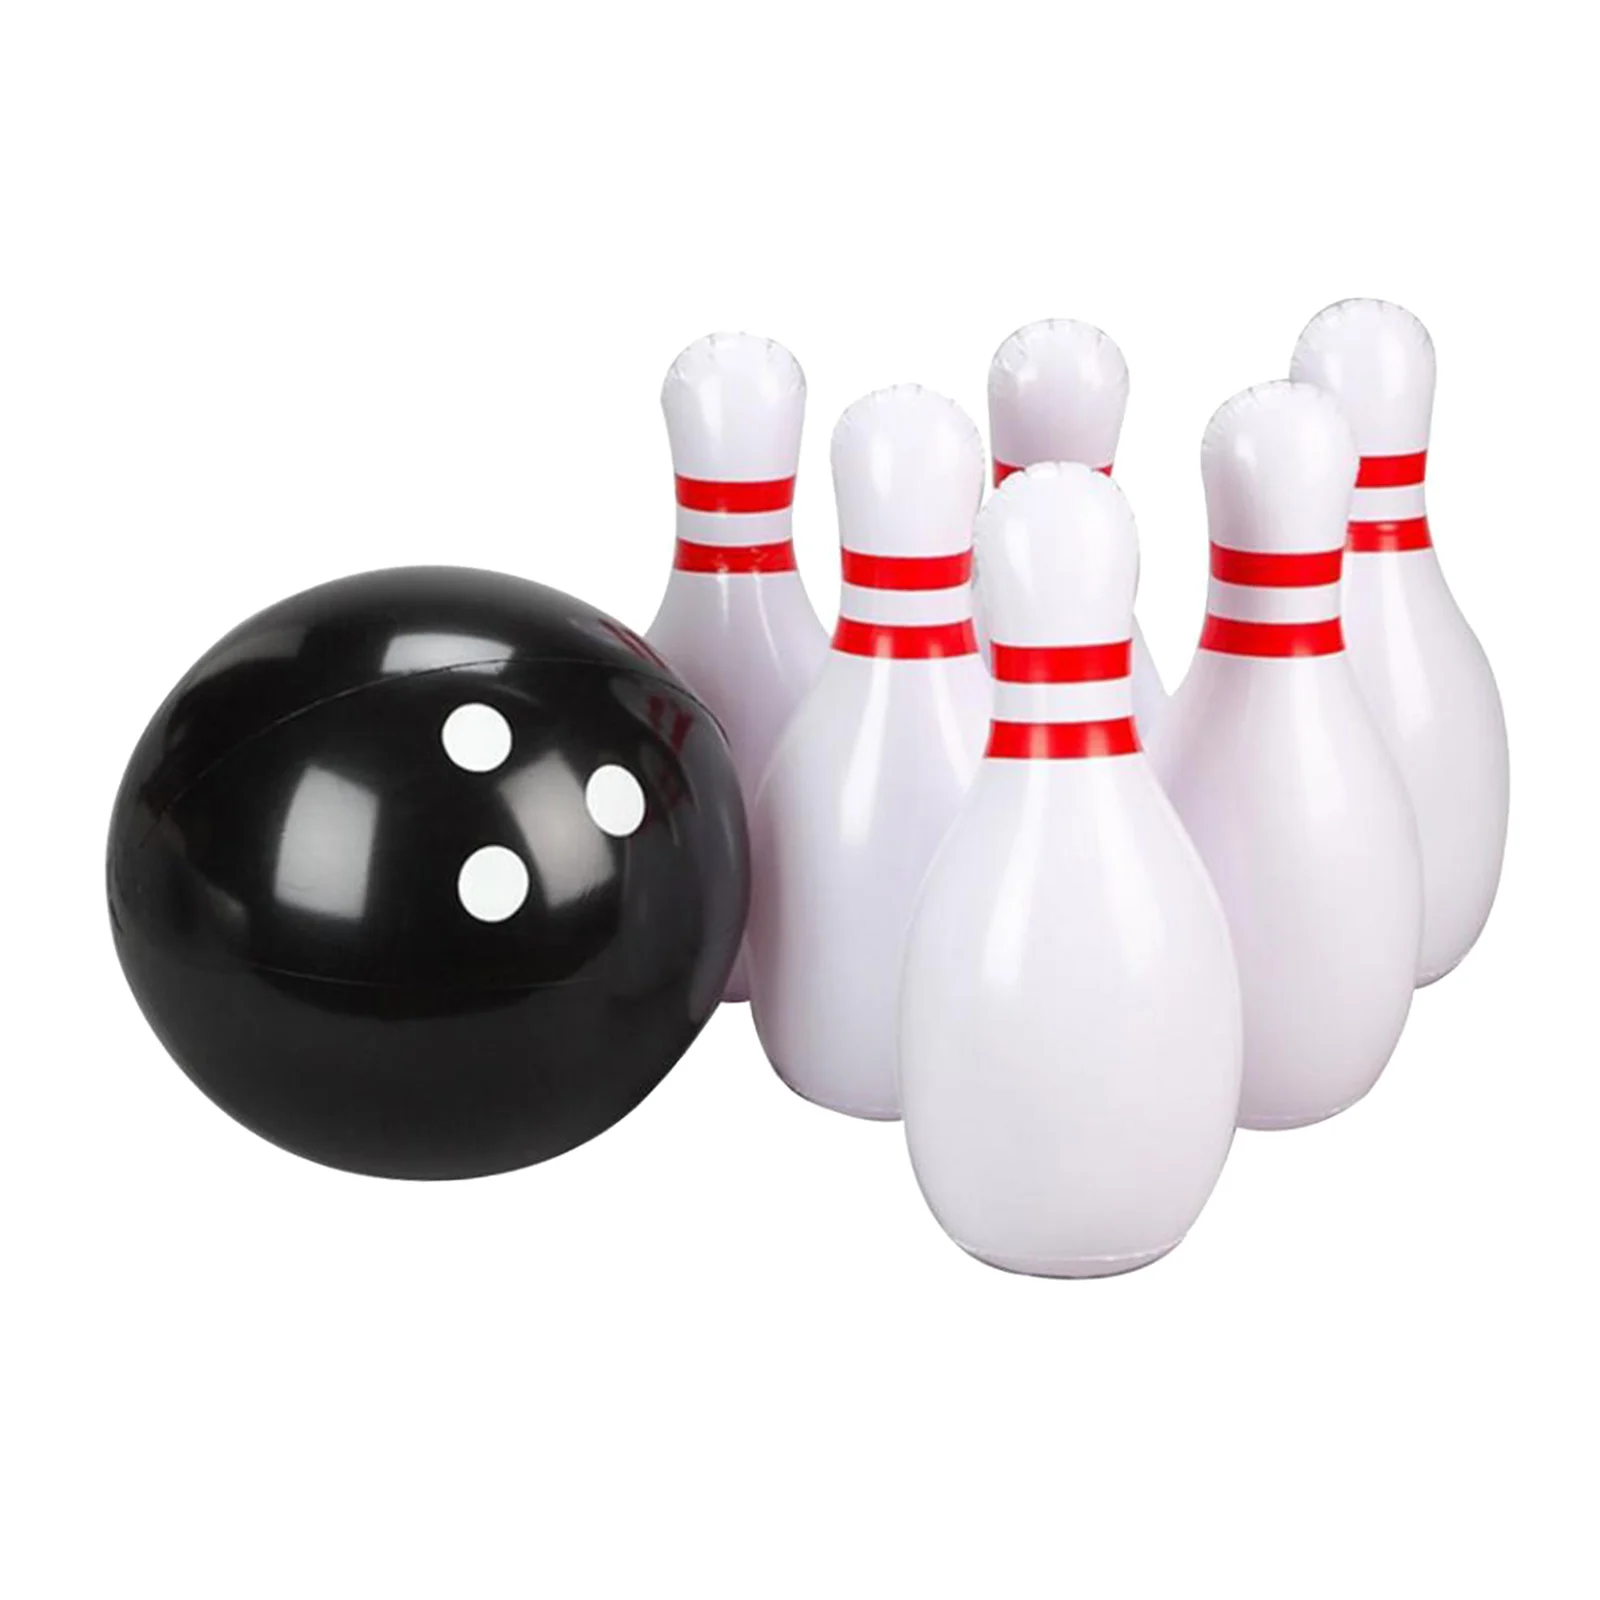 Inflatable Bowling Set (60x40CM) for Children - 6 Pin Bowling Set for Kids Indoor and Garden Toys Best Game for Family Together